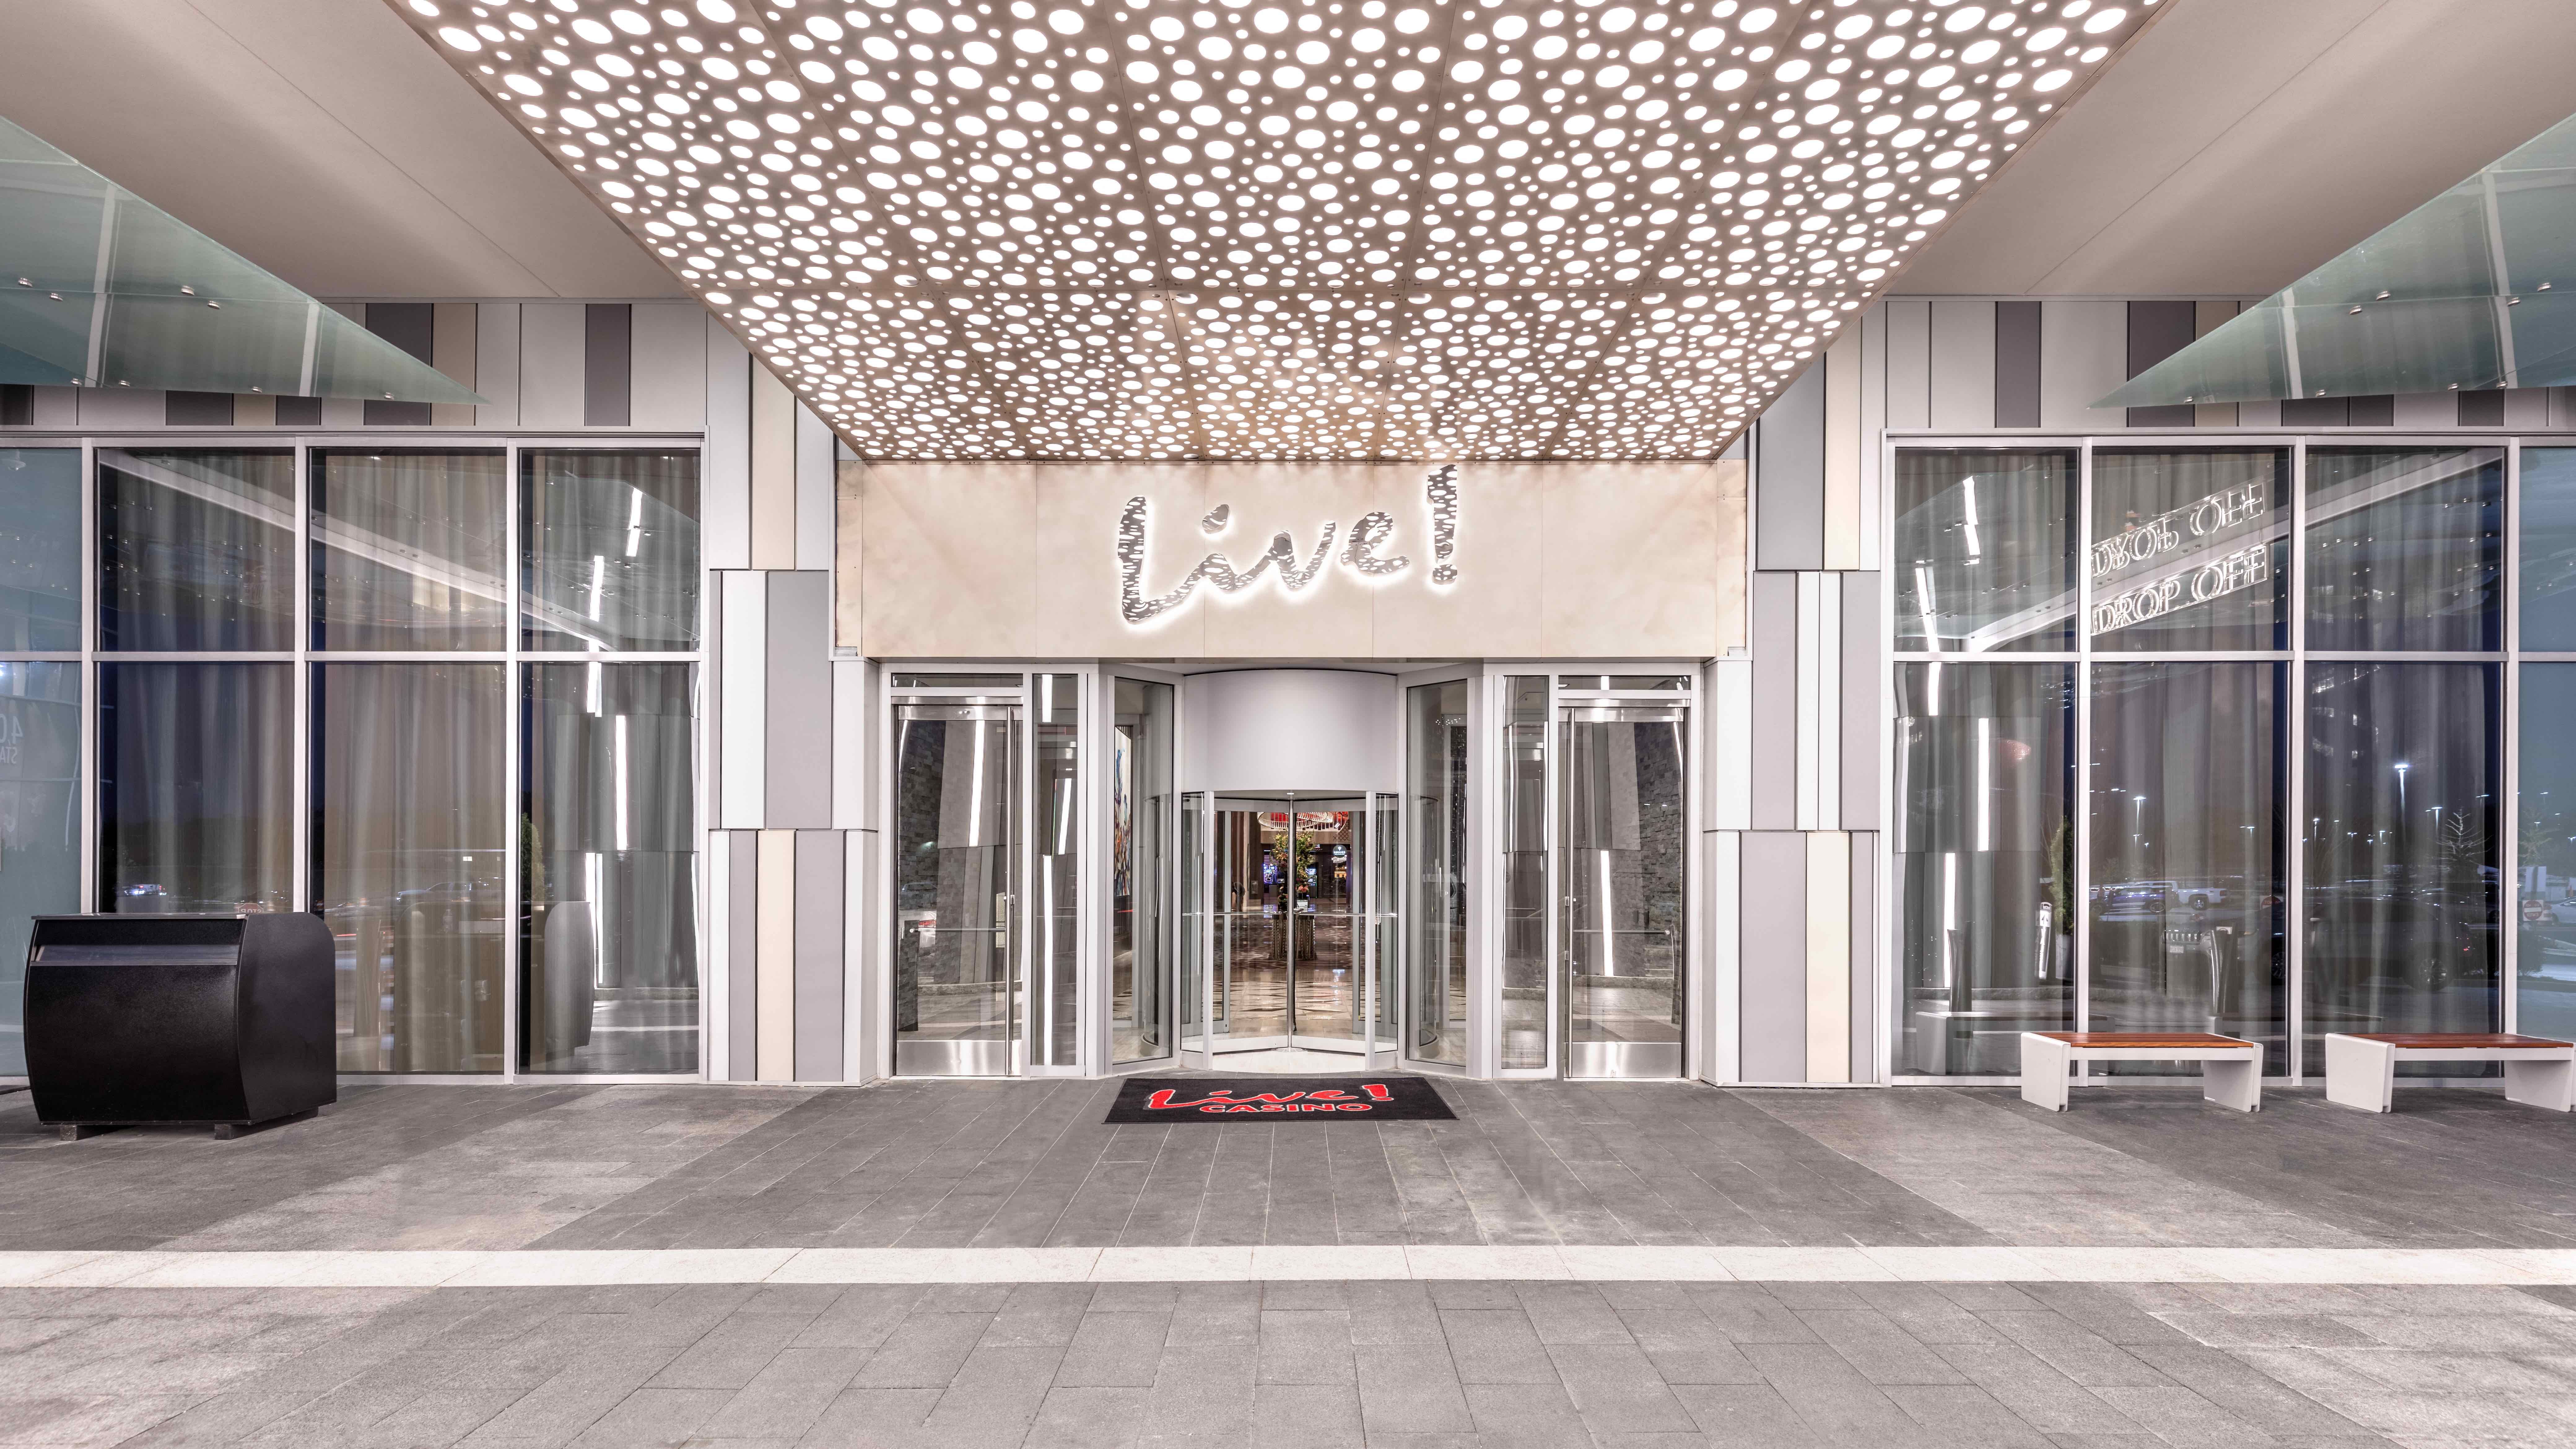 Móz Backlit Metal Solutions  illuminated ceiling panel in pattern of small circles above entrance to luxury hotel